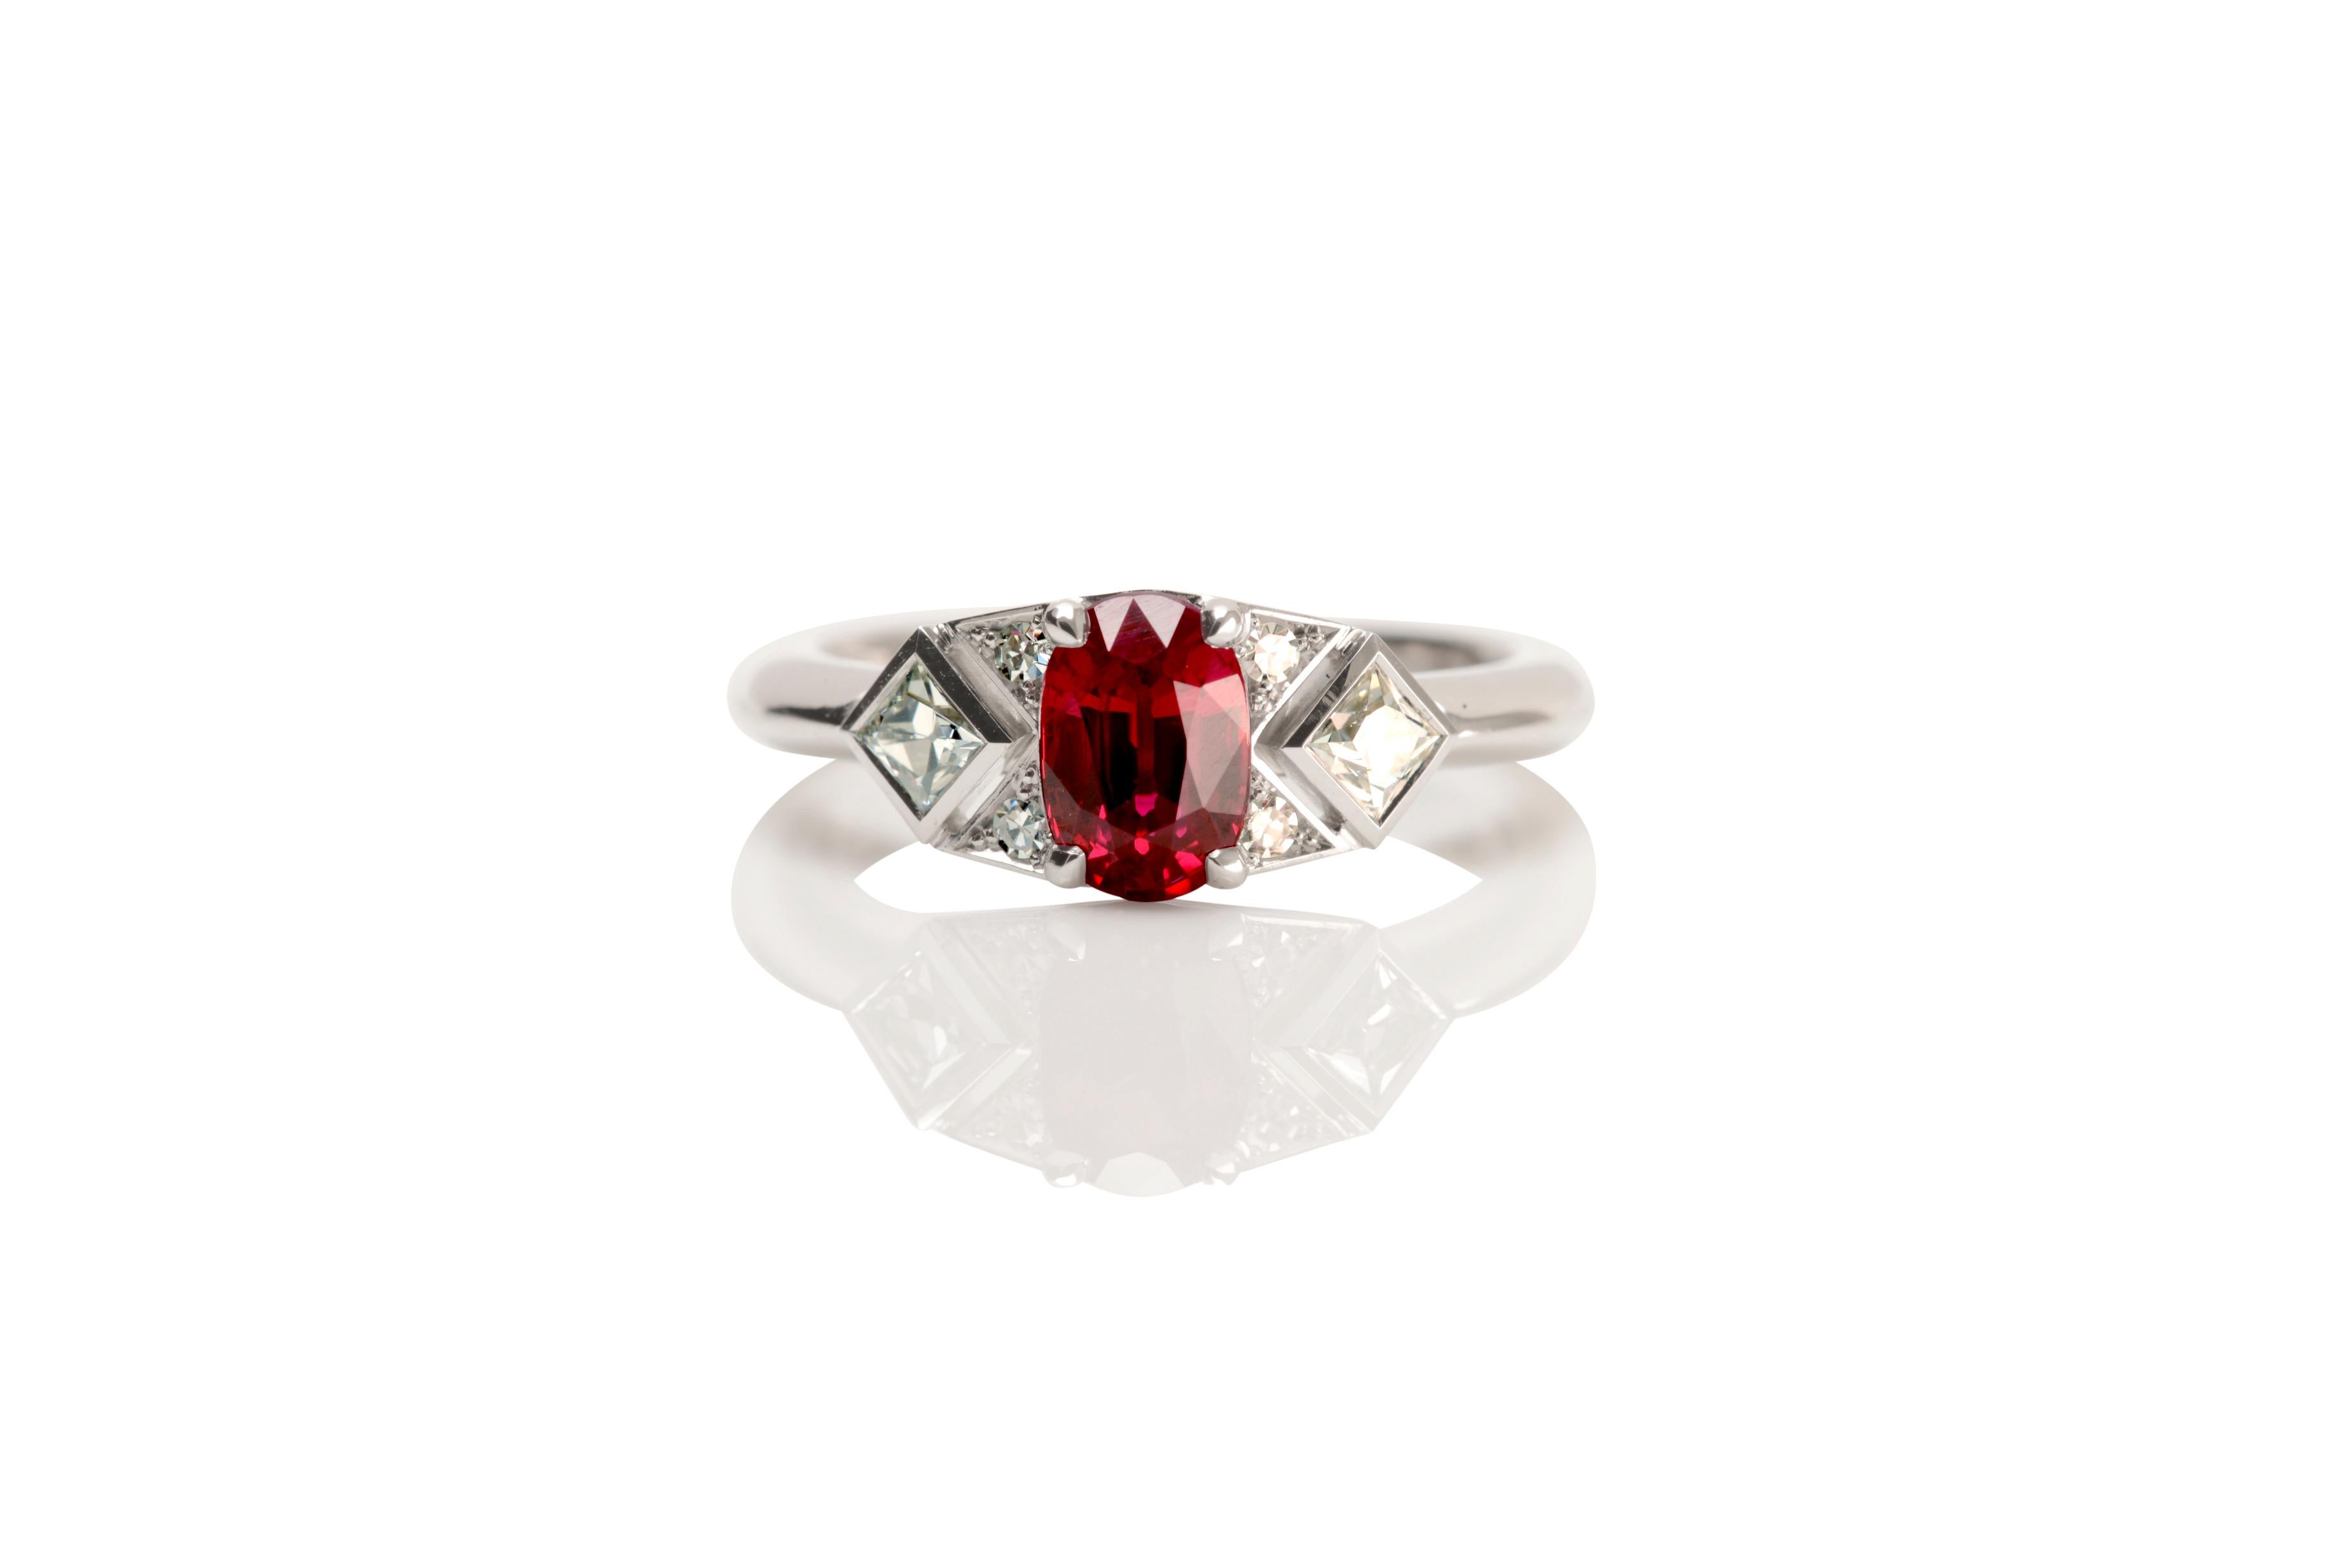 Nicky Burles has long been inspired by Art Deco fine jewellery, this beautiful, handmade, 18 karat white gold ring pays homage to this classic period. A rare, natural Burmese ruby of 1.14 carats sits in the centre in a four claw setting. The ornate